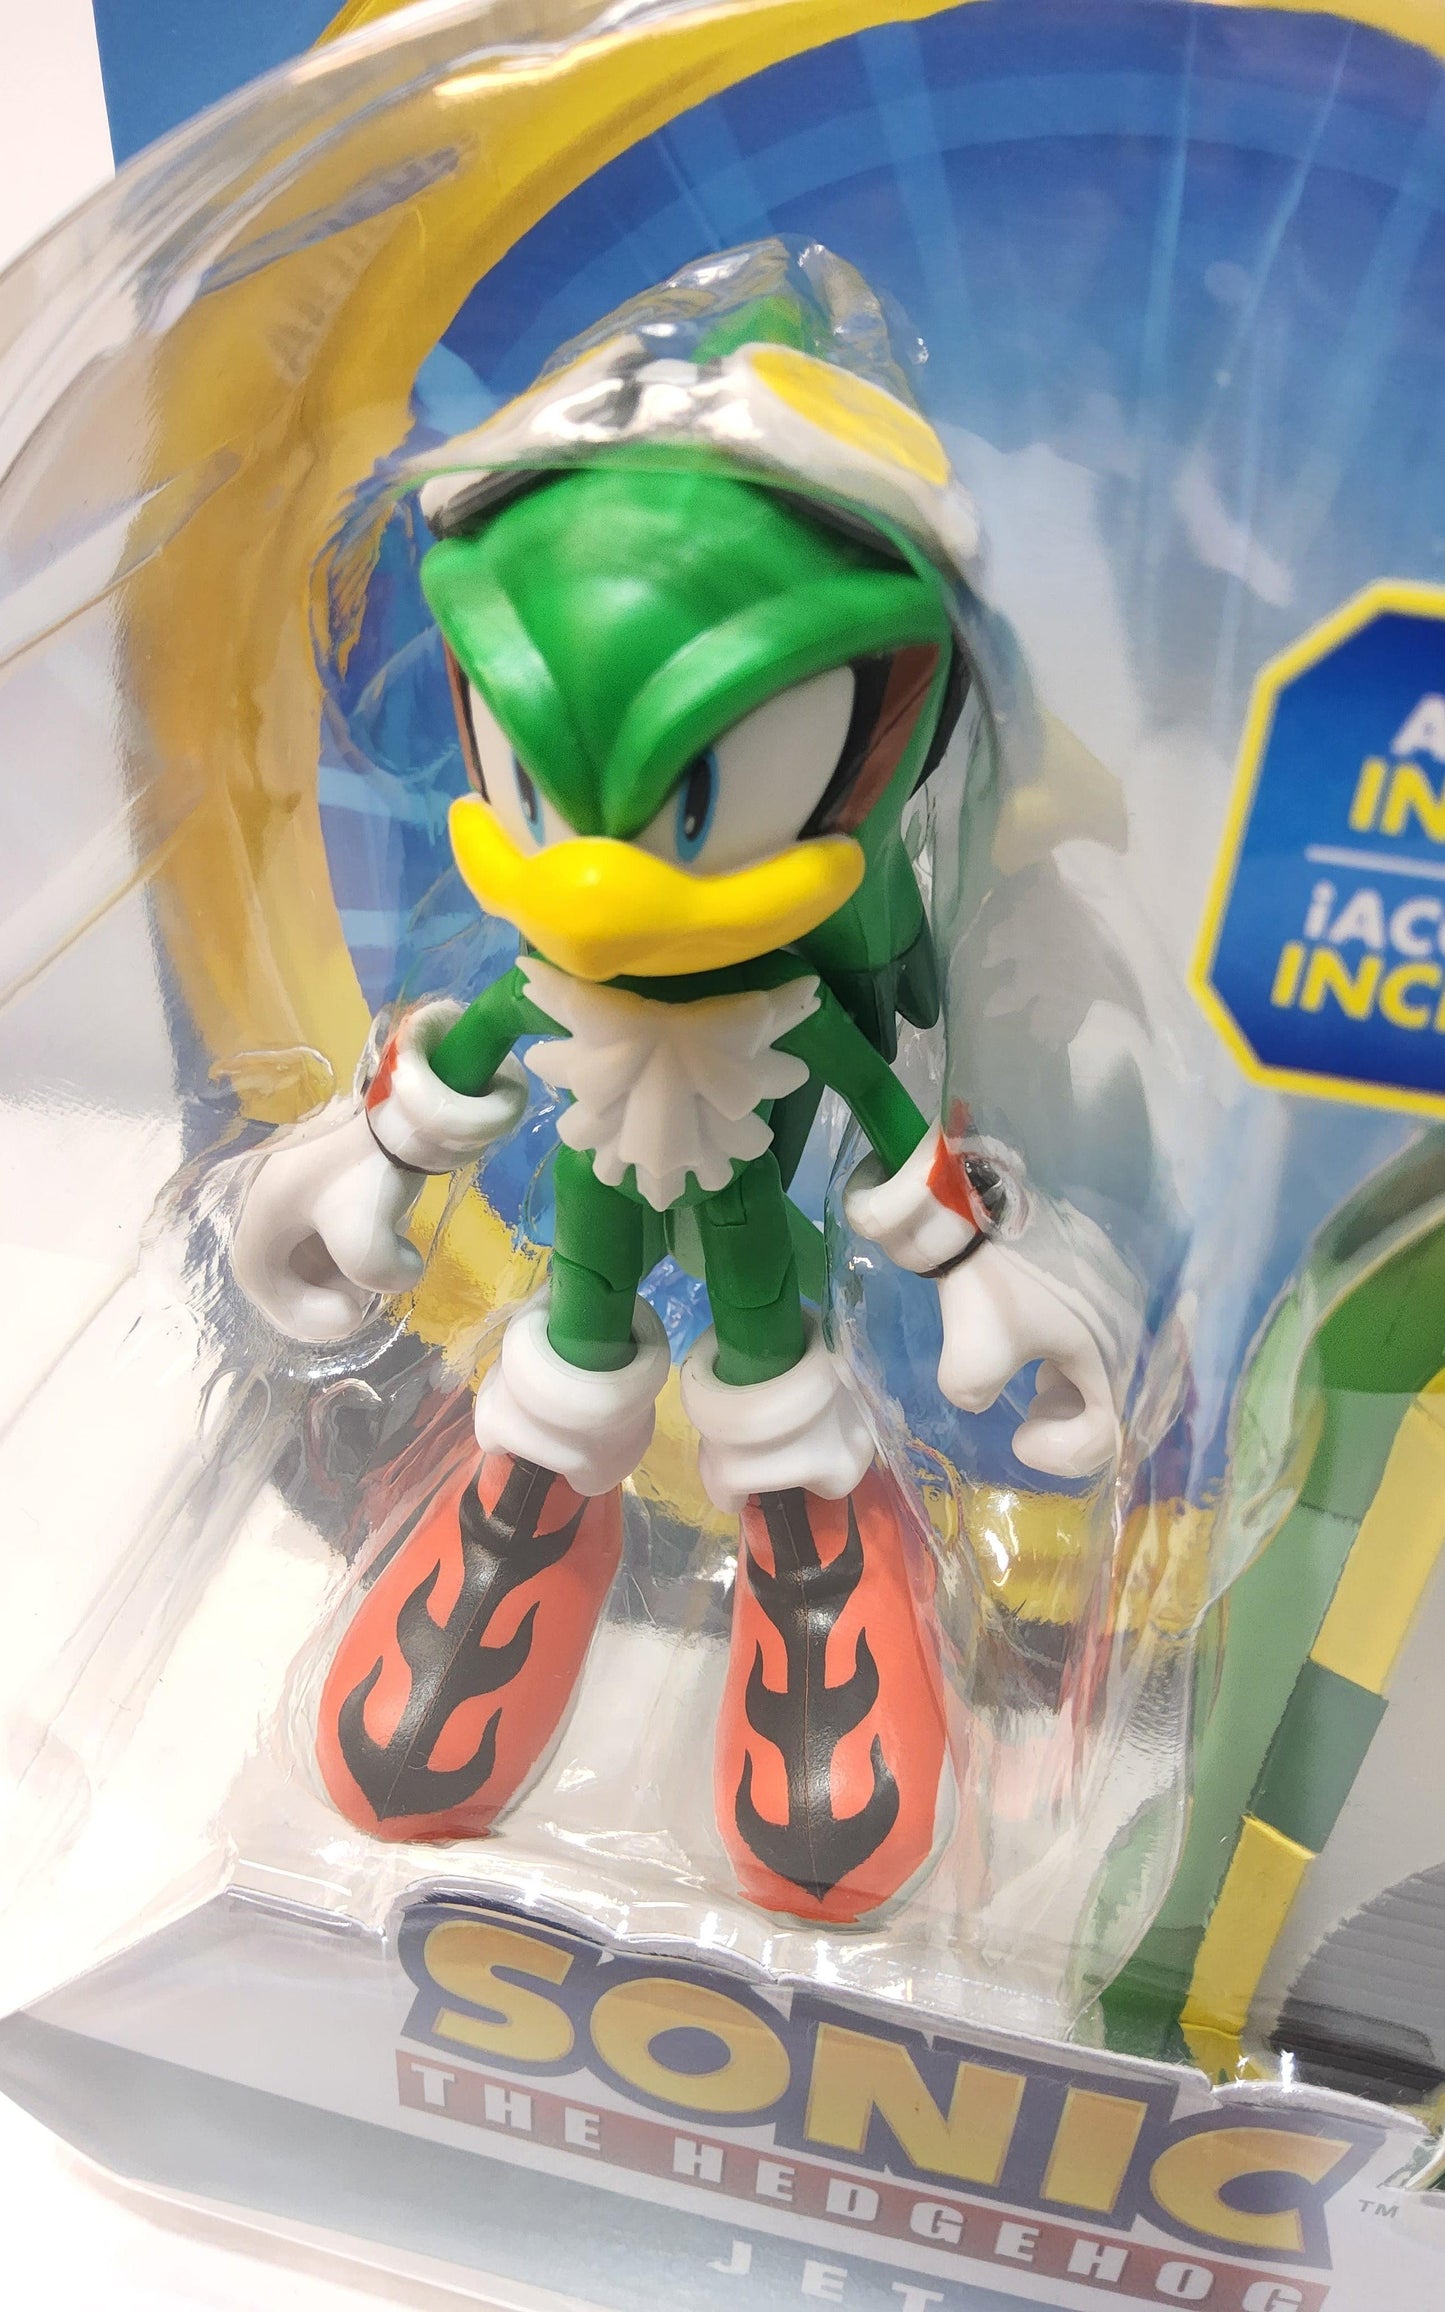 Sonic the Hedgehog Figure: JET The Hawk with Type-J Board 4" Action Figure - Logan's Toy Chest